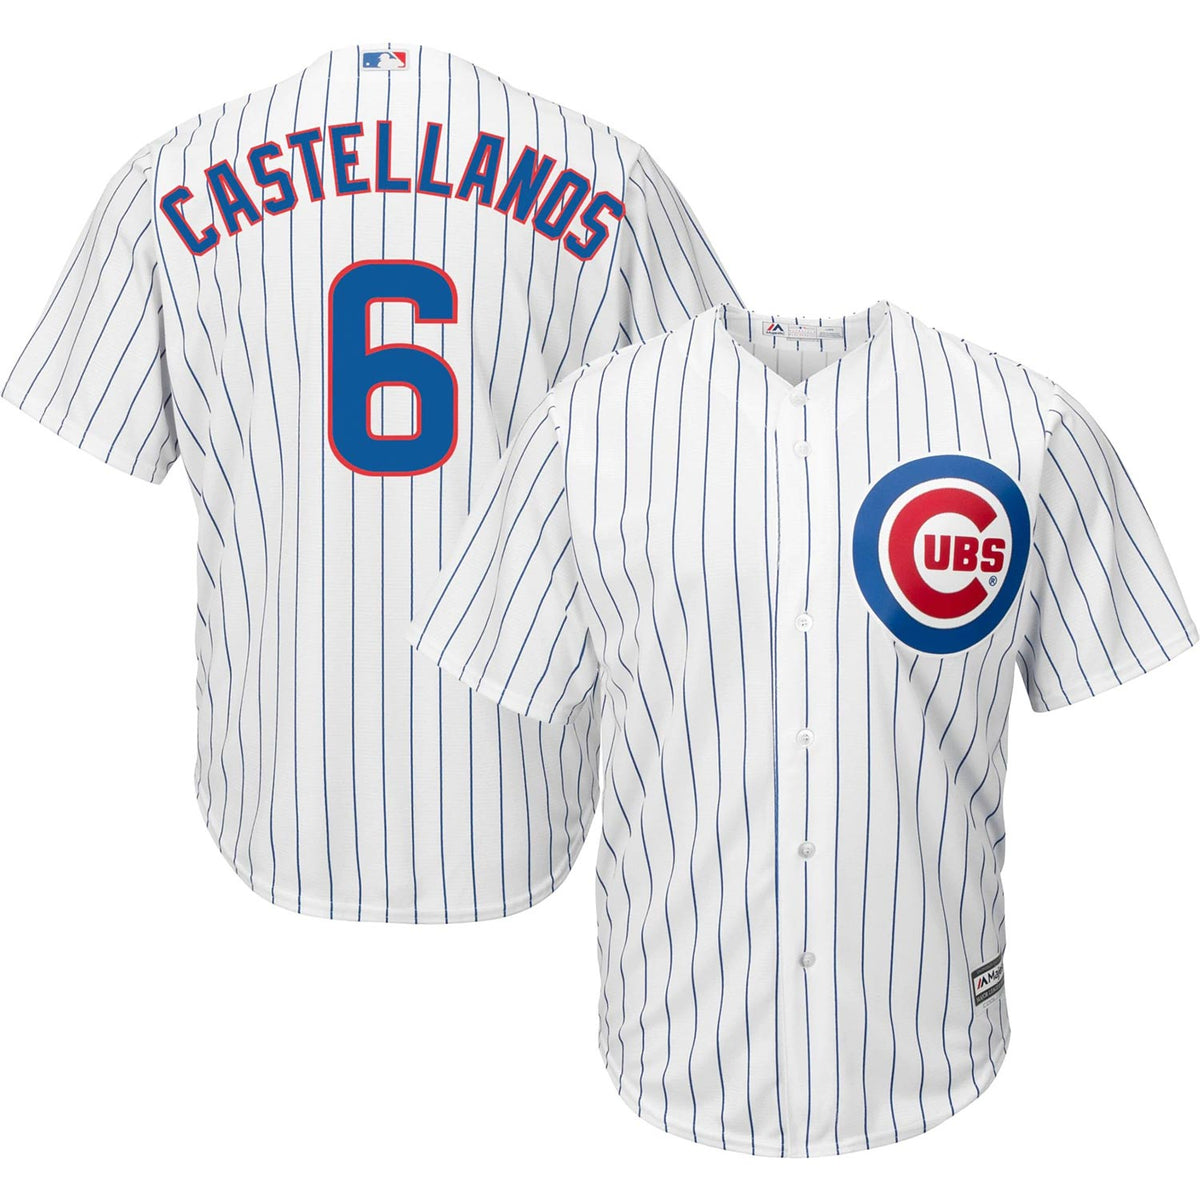 Chicago Cubs Customized Youth Nike Home Replica Cool Base Jersey X-Large = 18-20